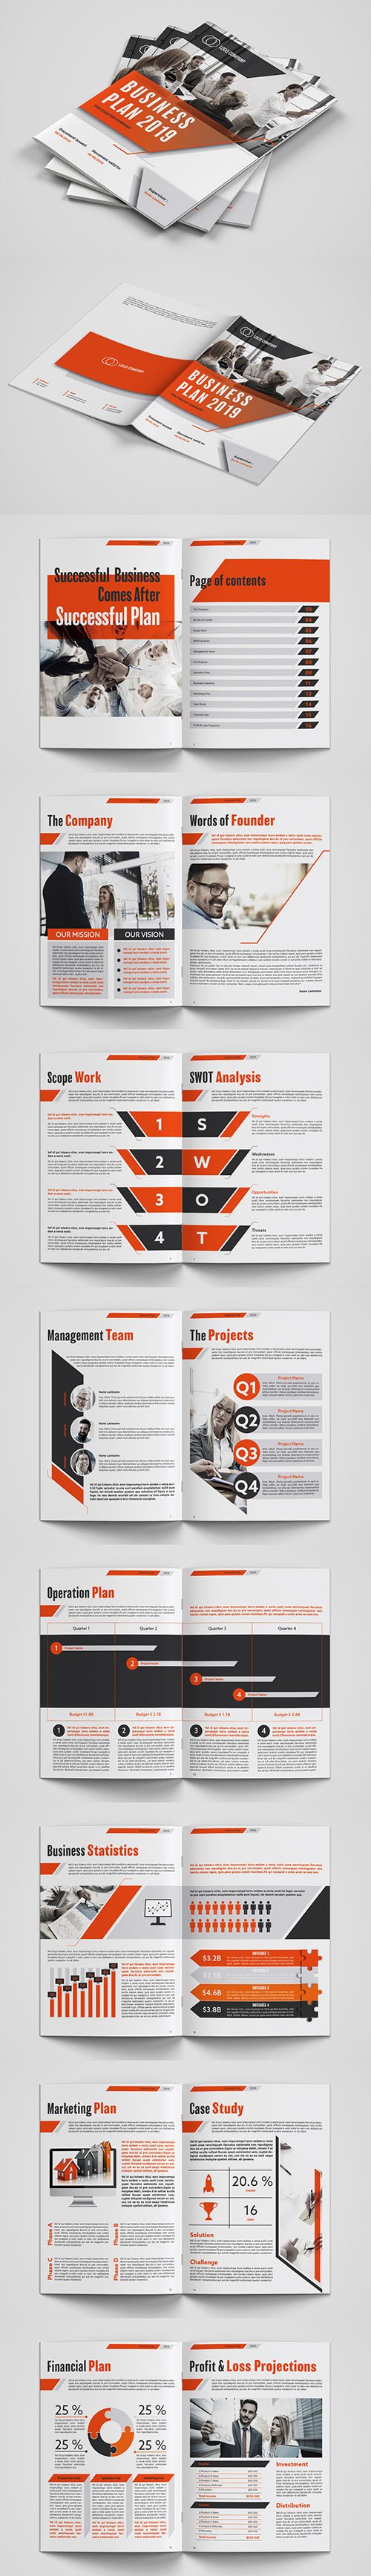 Business Plan Layout with Red Accents